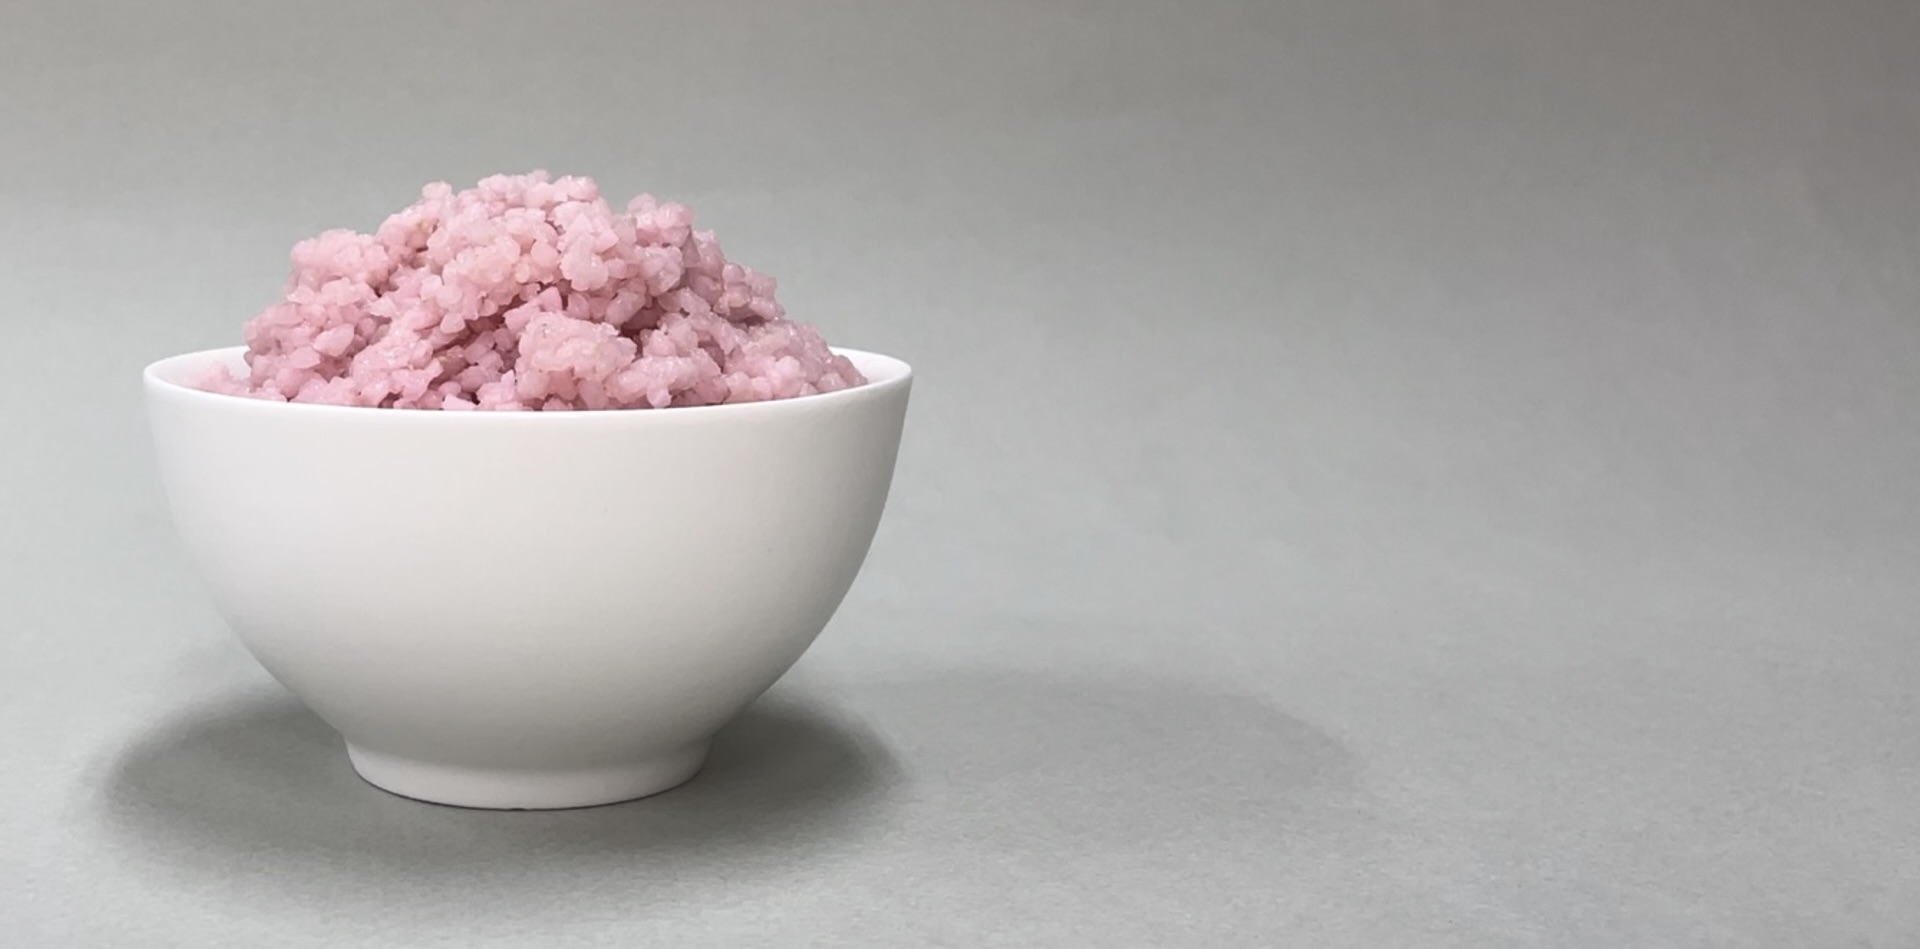 rice-grown meat will offer 'world of possibilities'